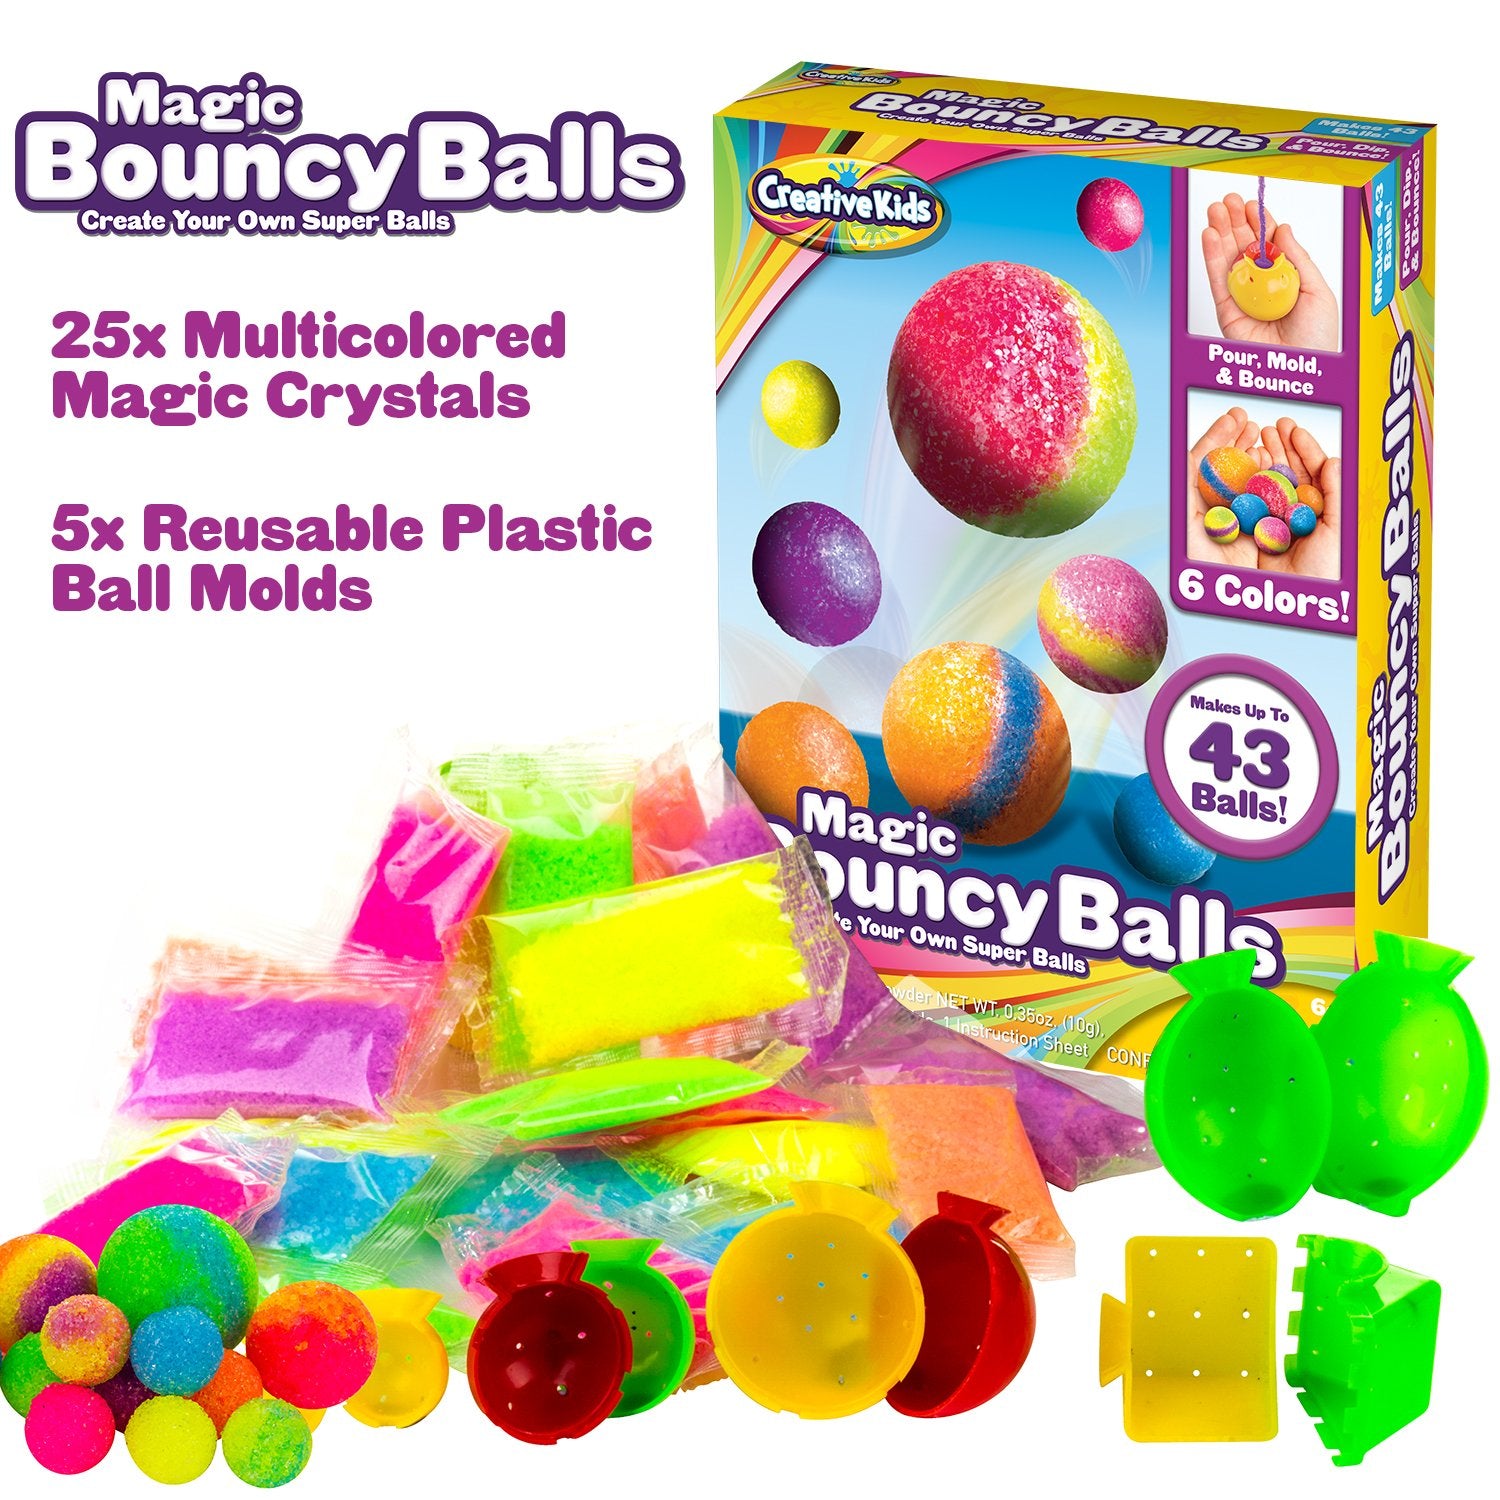 Creative Kids DIY Magic Bouncy Balls - Create Your Own Crystal Powder Balls Craft Kit for Kids - Includes 25 Bags of Multicolored Crystal Powder & 5 Molds - Makes Up to 43 Balls